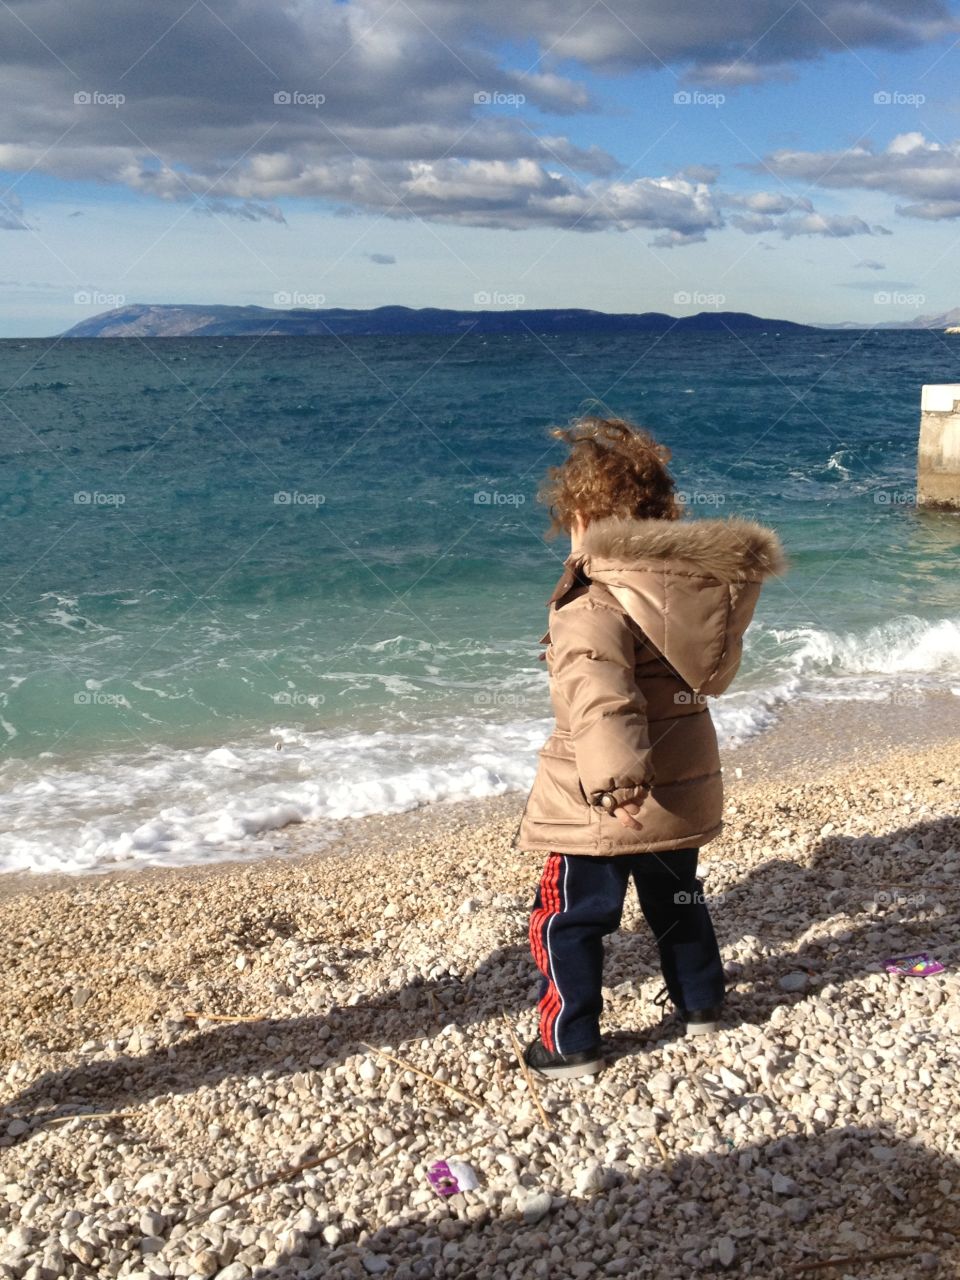 Sea and kid. Boy throws stones in the sea